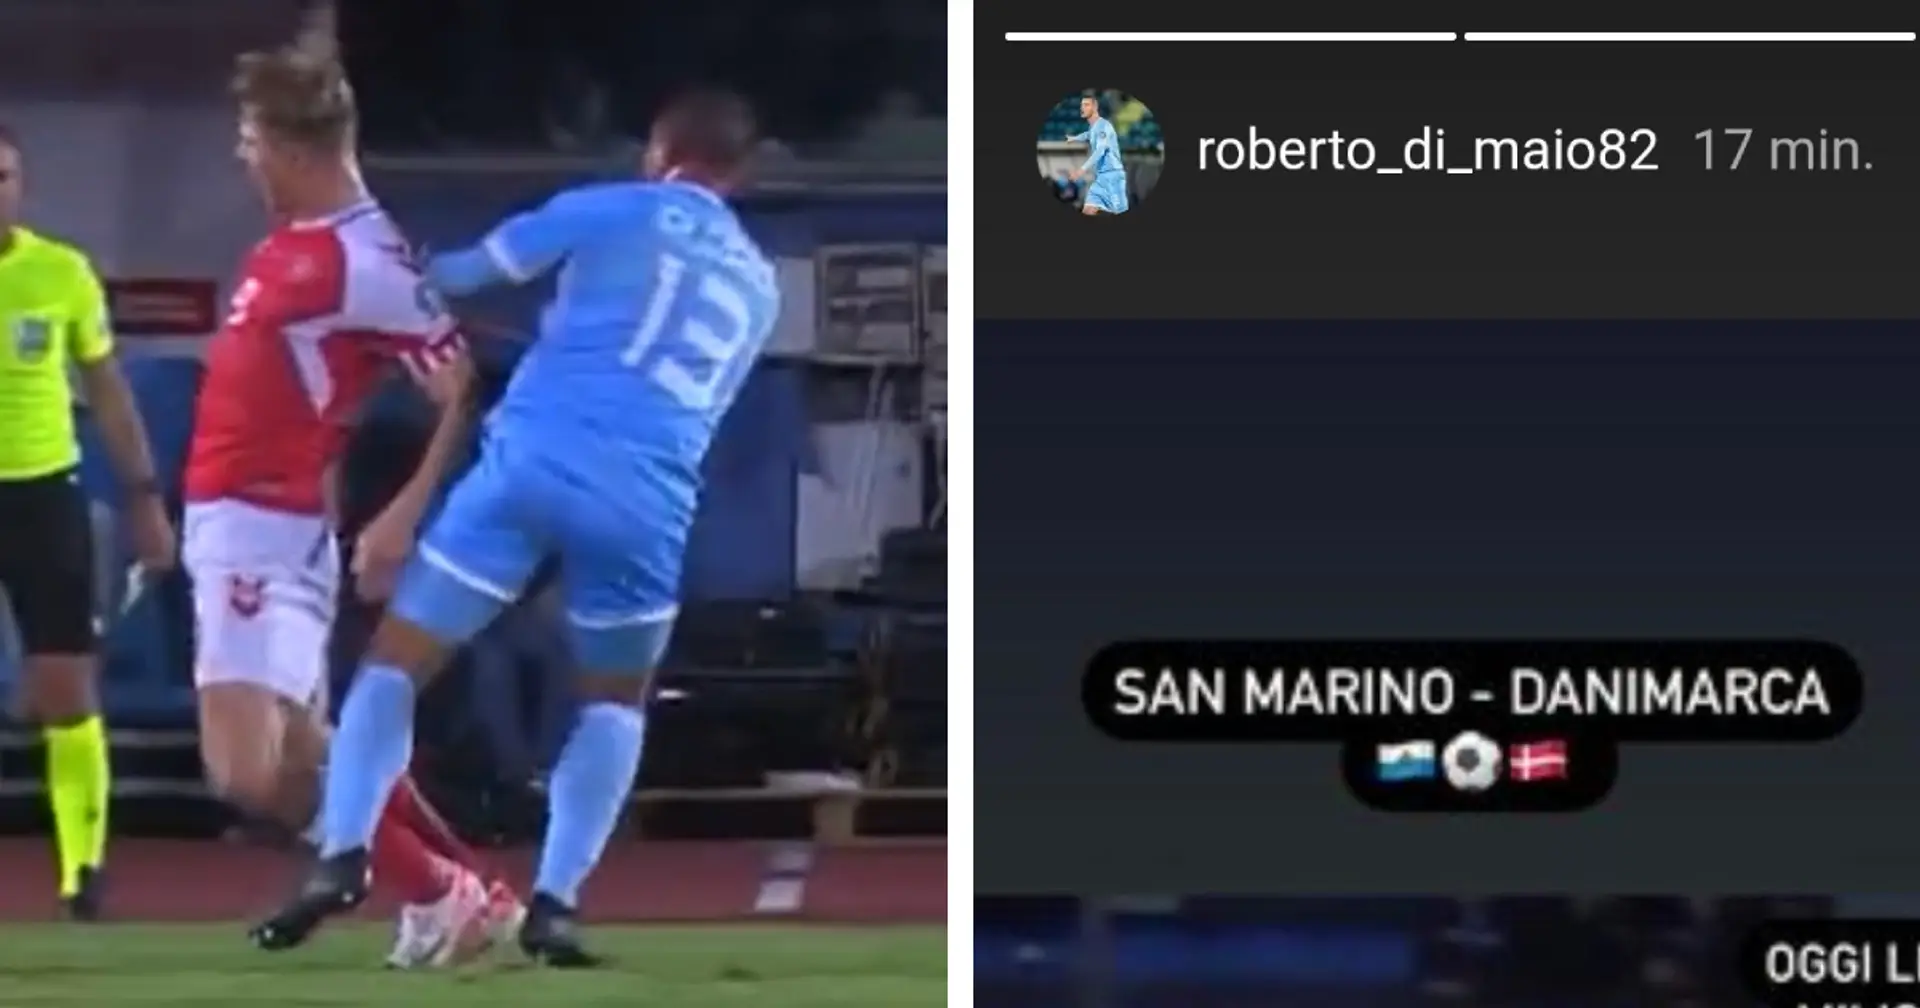 'Mr €80m complains. Real men played 15 years ago': San Marino player who tried to injure Hojlund hits back